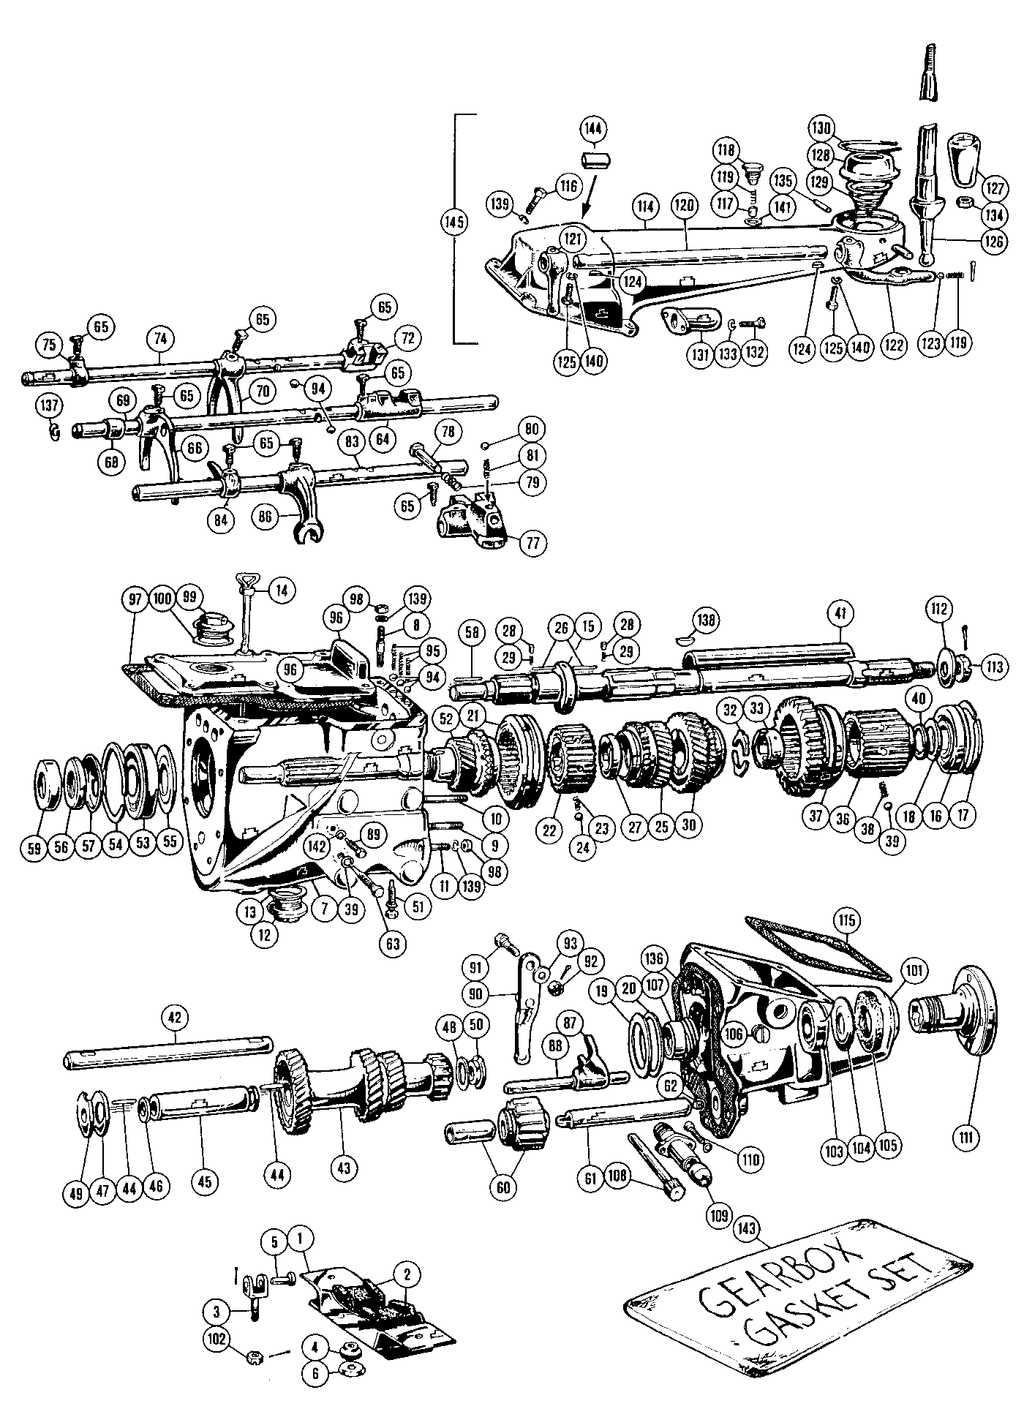 MGTD-TF 1949-1955 - Gearboxes & gearbox parts - 1